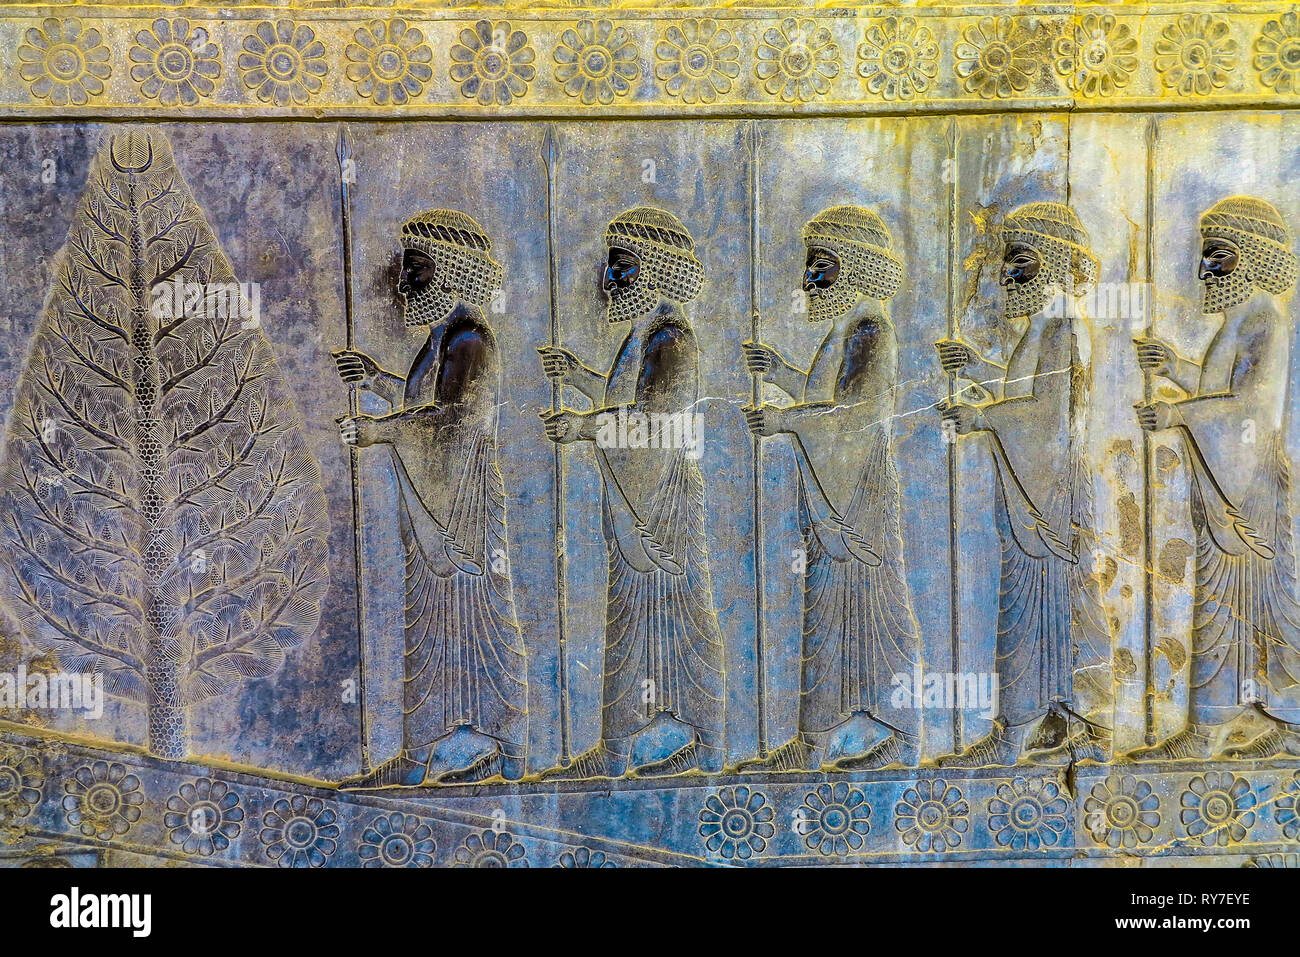 Persepolis Historical Site Wall Carving of Ancient Persian Soldiers and a Tree Stock Photo